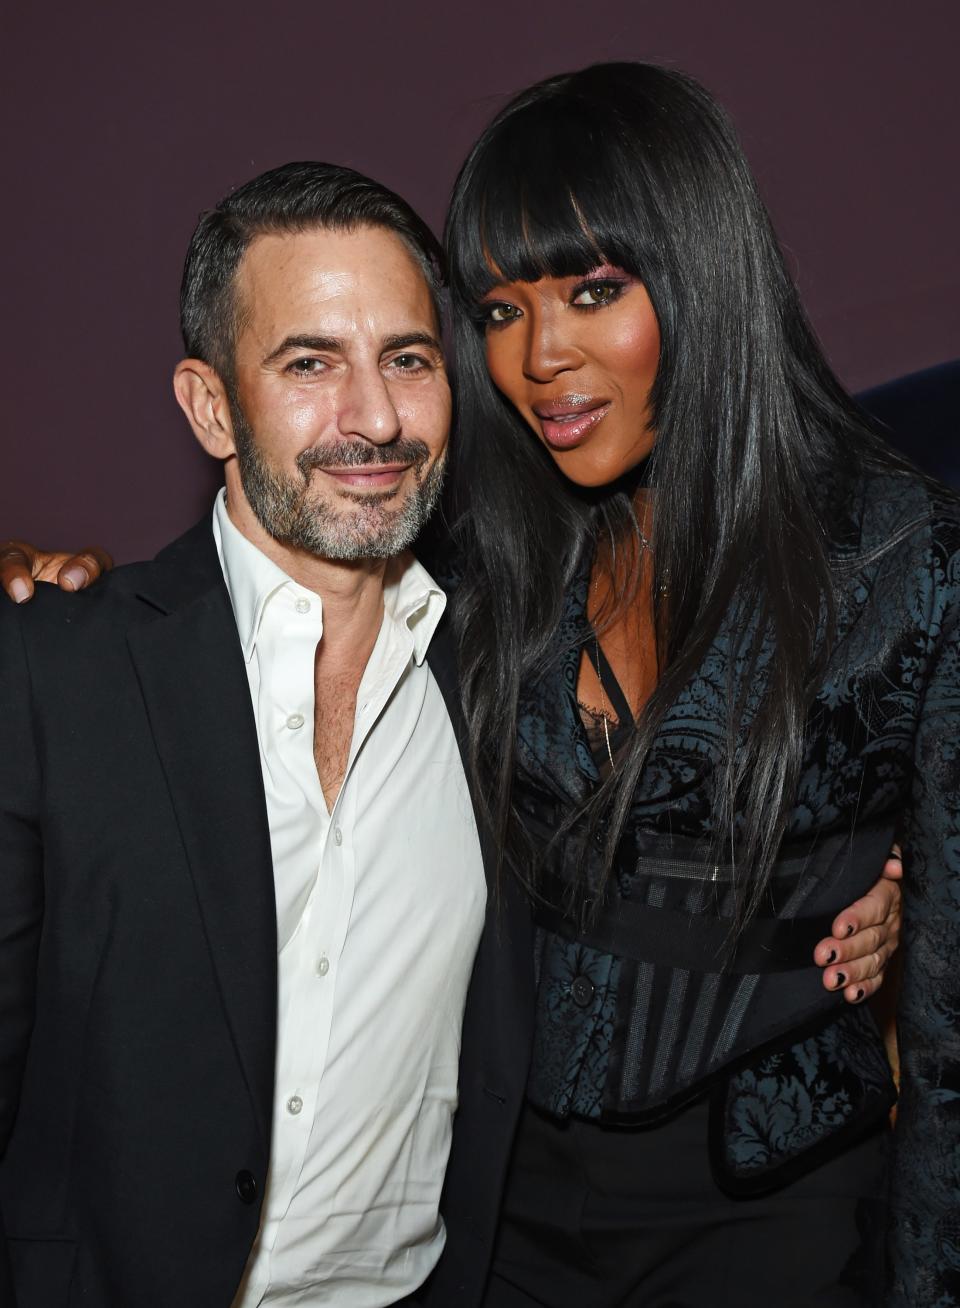 To understand how Naomi Campbell became an icon, you have to start at the beginning.